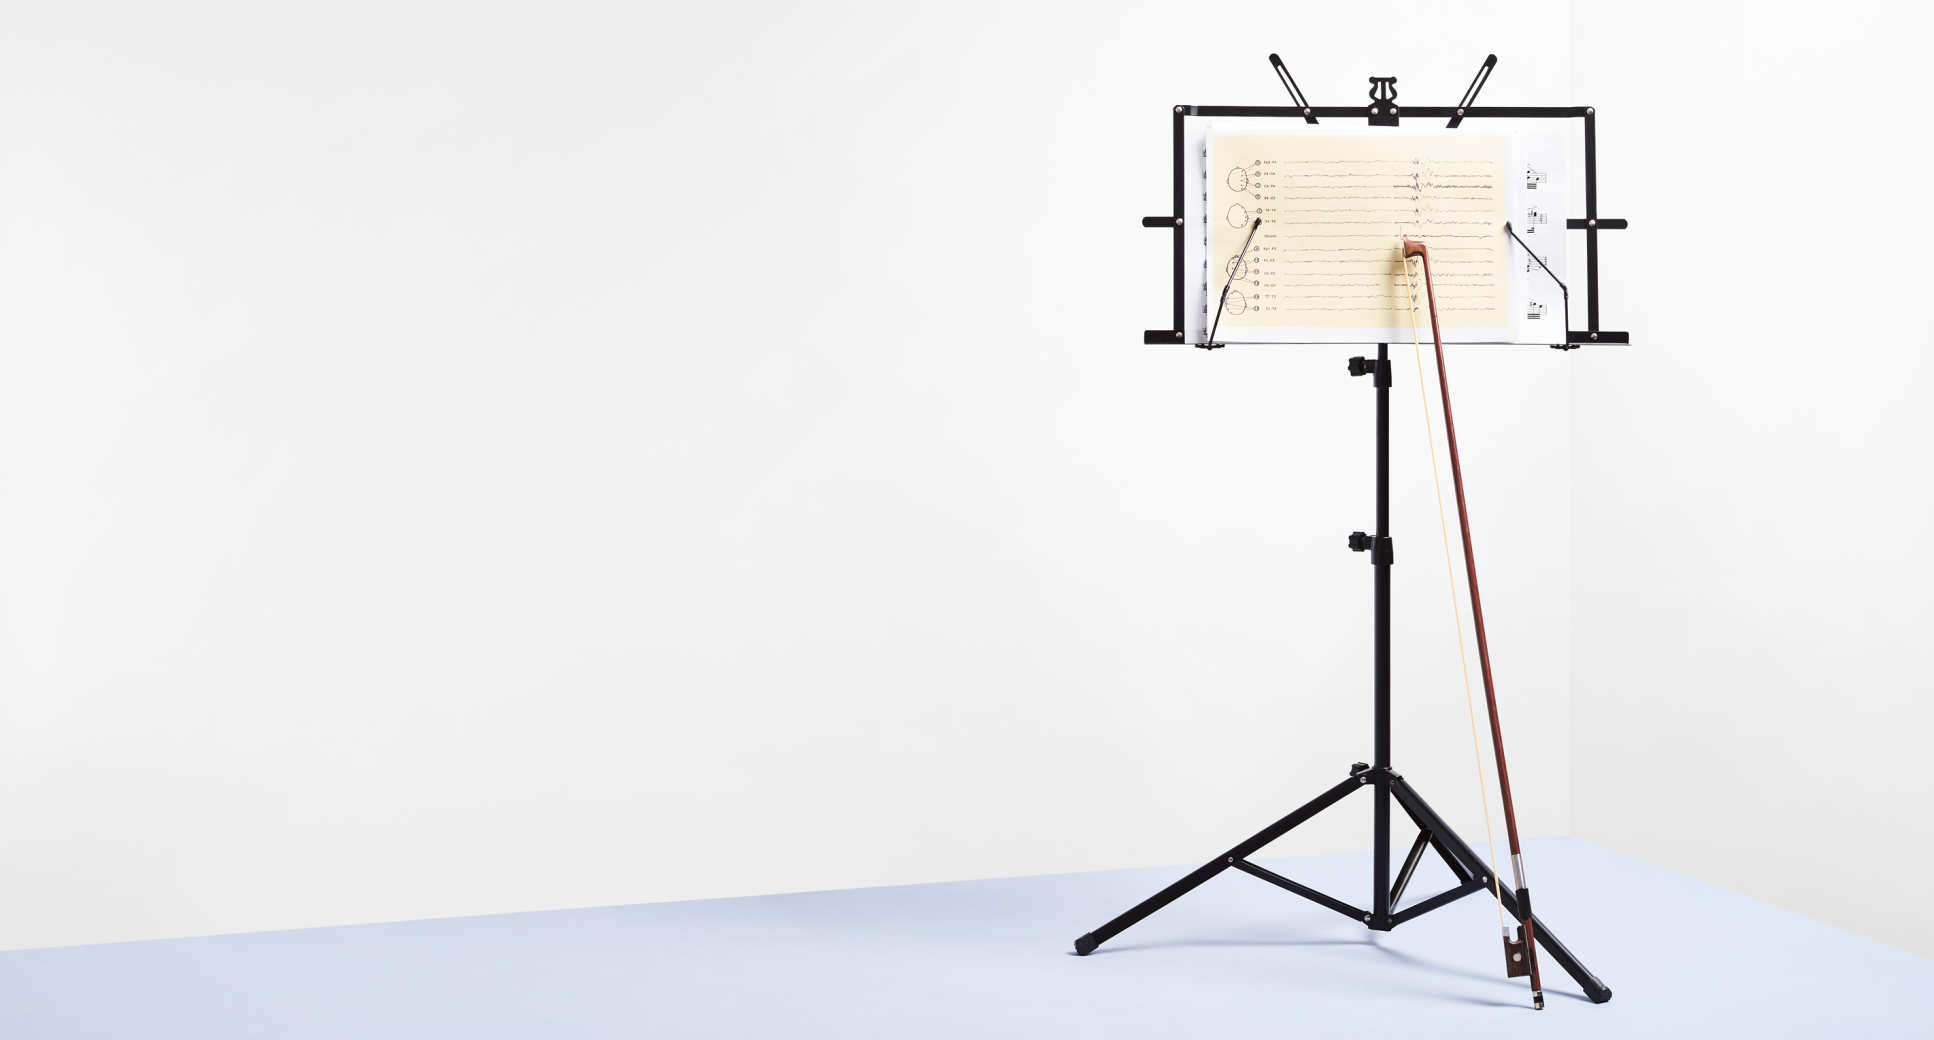 Image of a music stand with a chart and cello bow